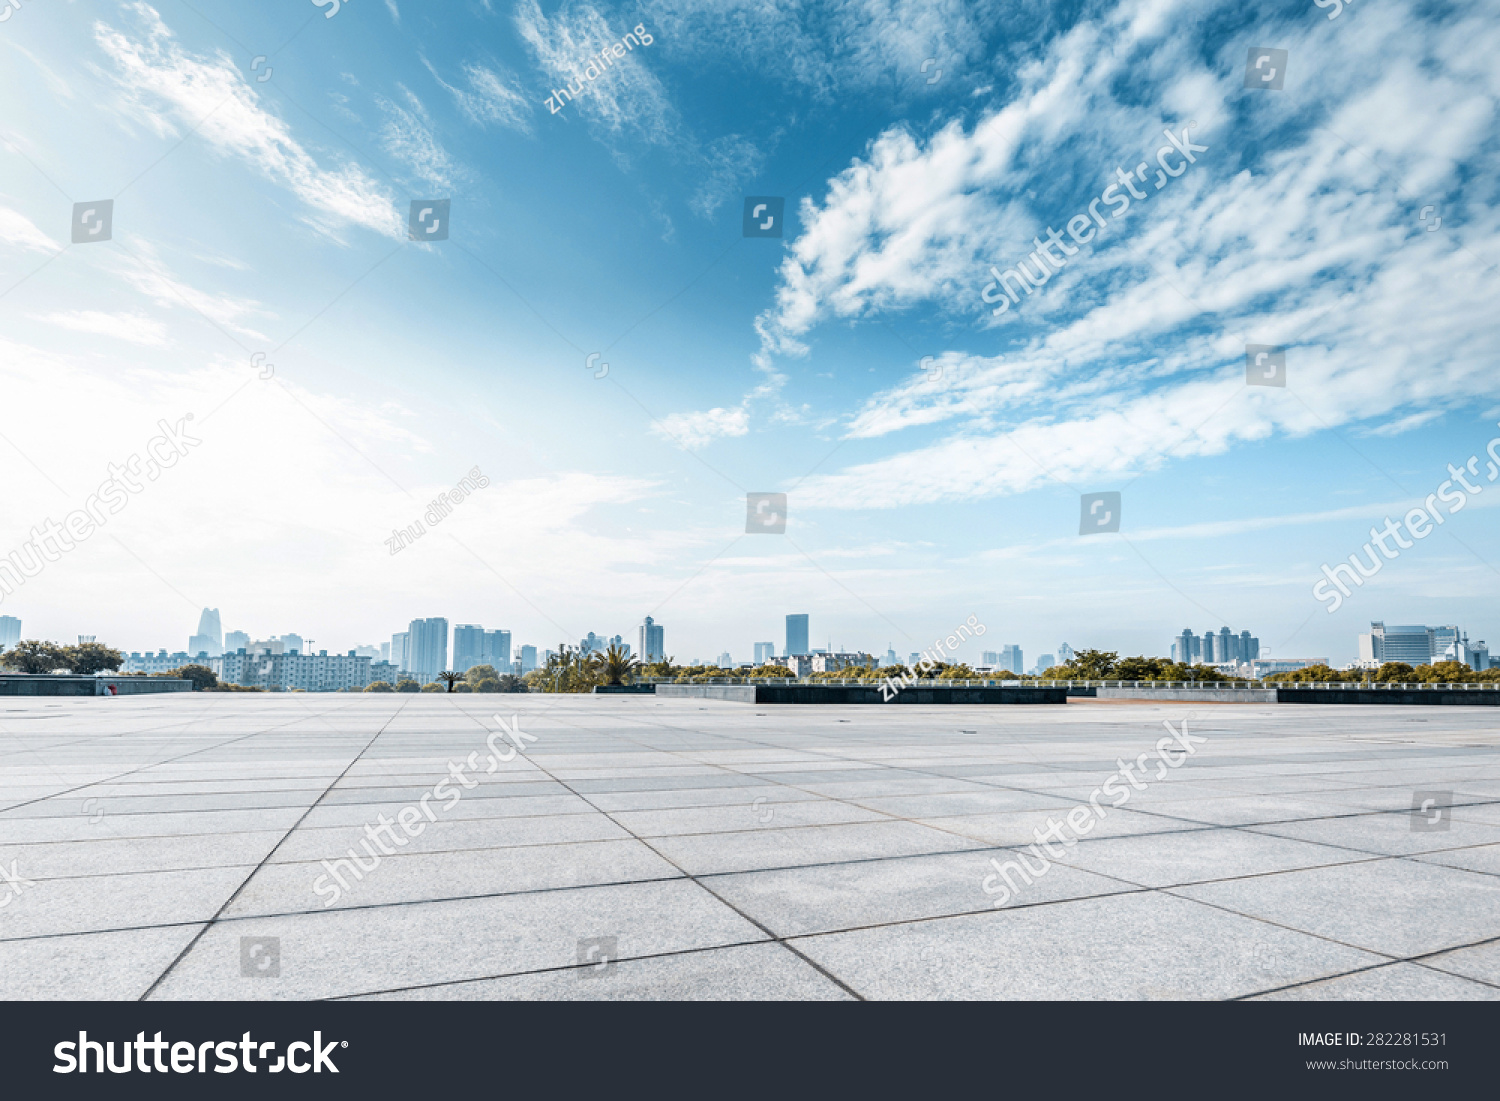 Empty square and floor with sky #282281531